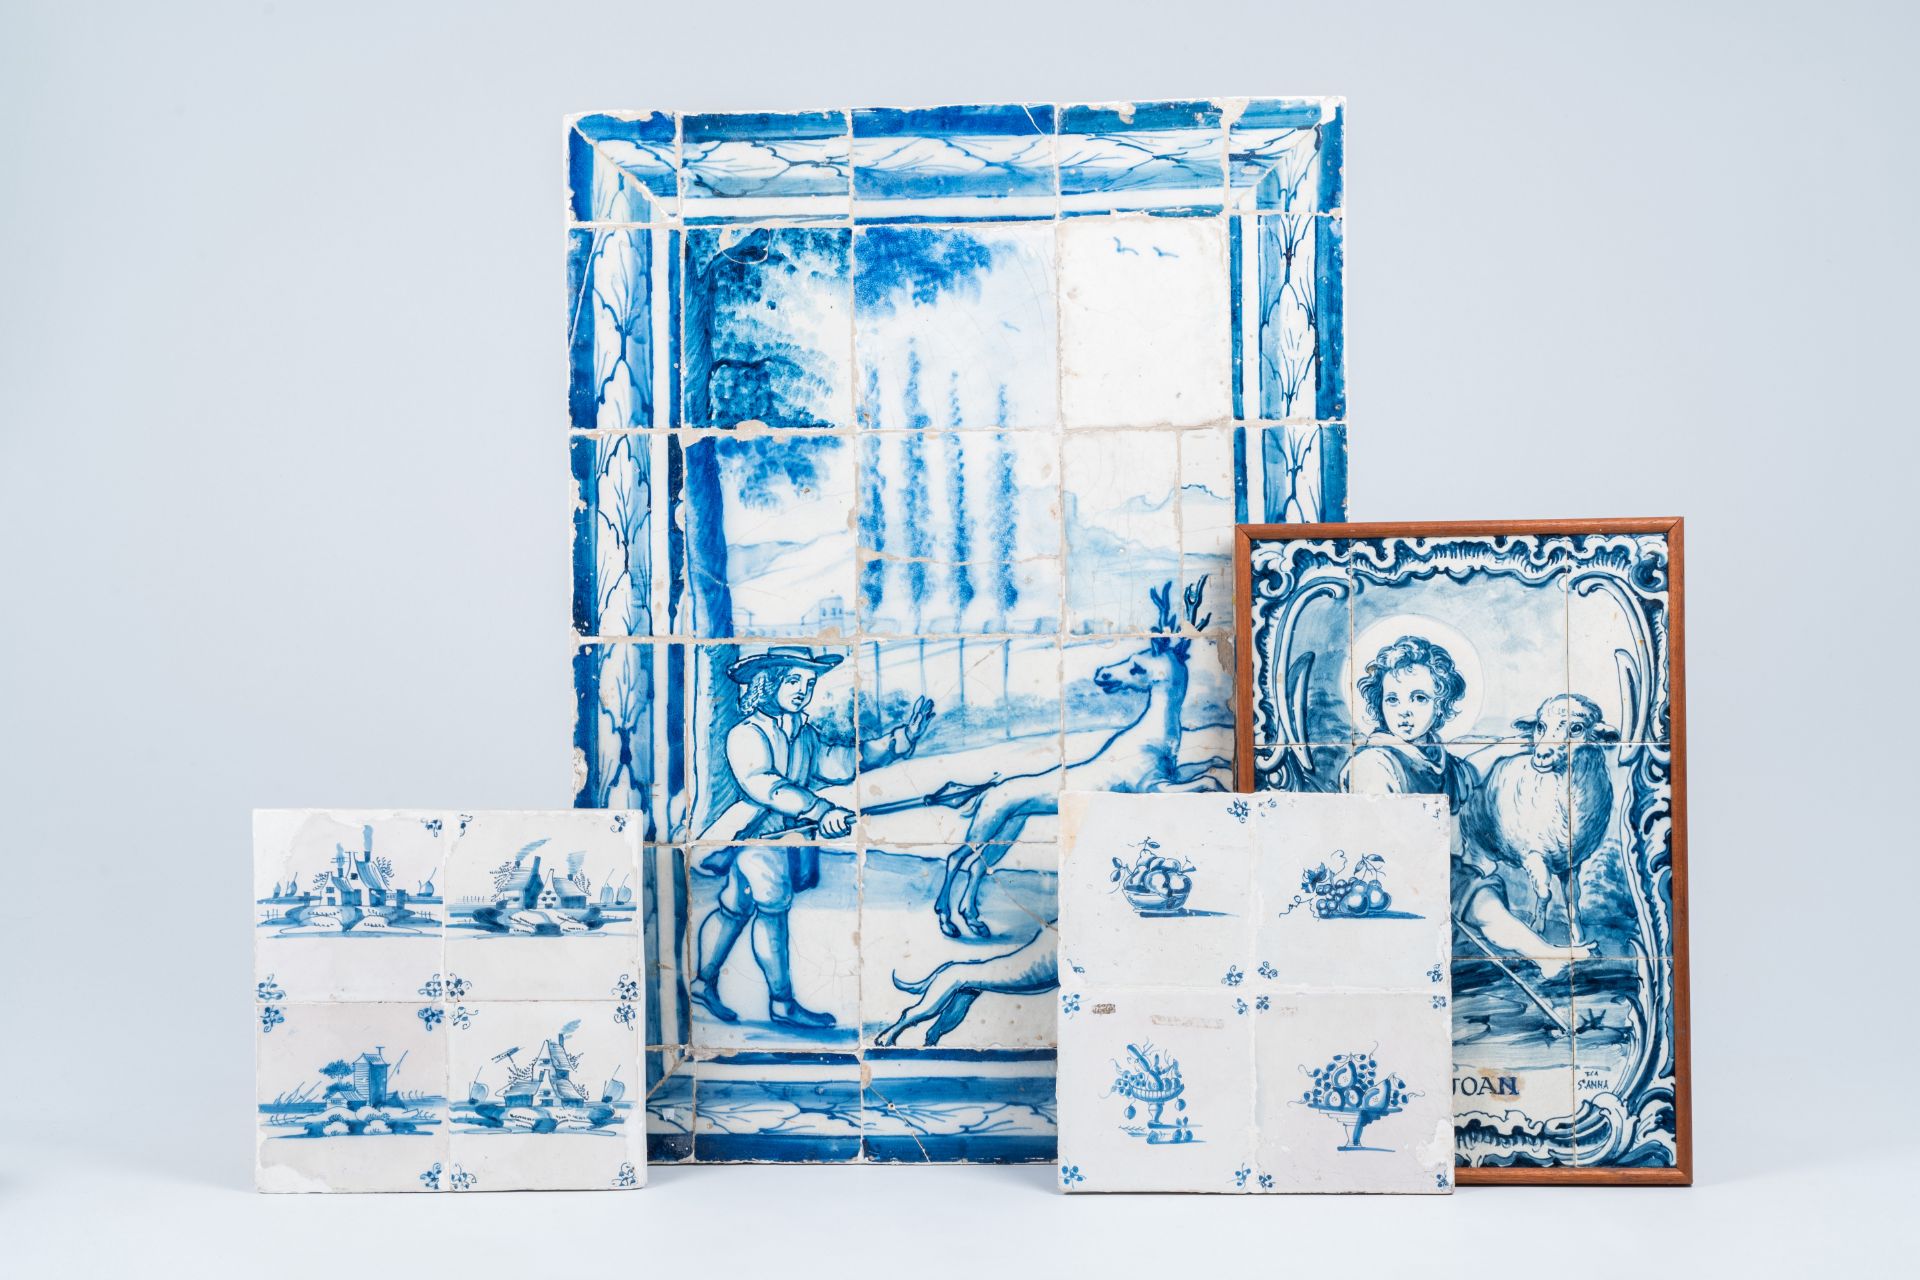 Two blue and white Portuguese tile murals and two sets of four Dutch Delft tiles, 17th C. and later